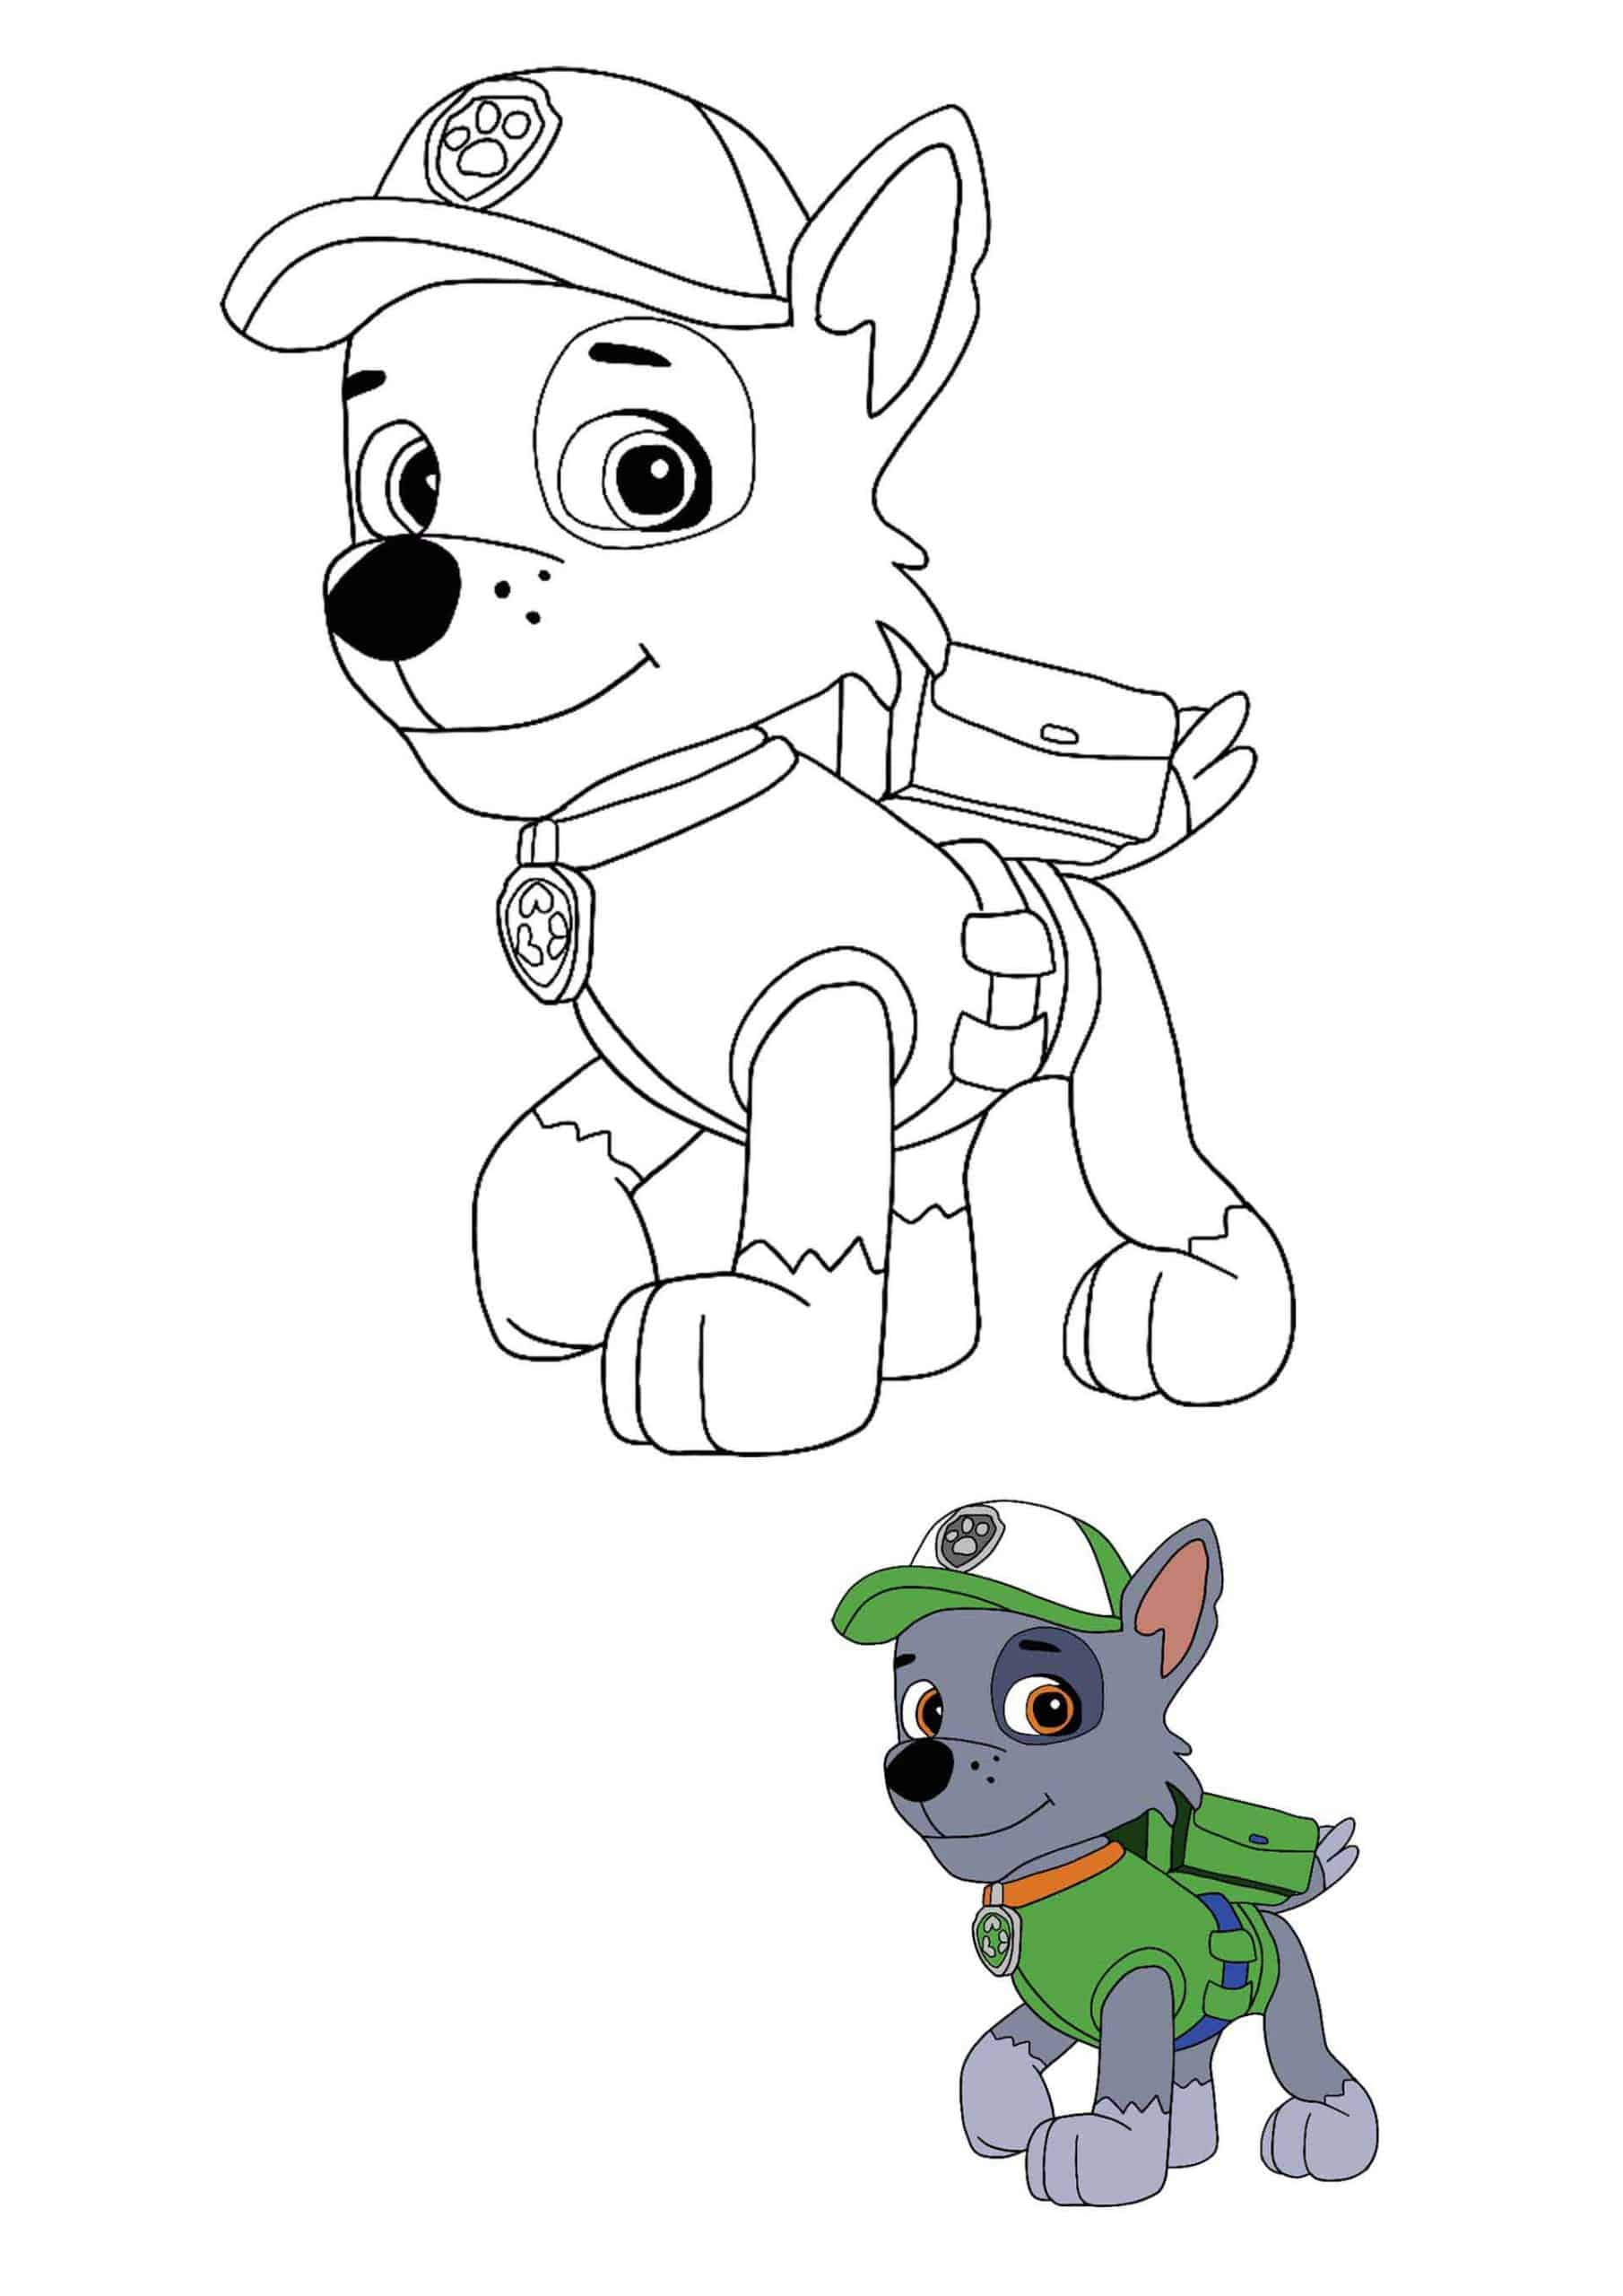 Rocky Recycling Pup And His Main Color Is Green Coloring Page